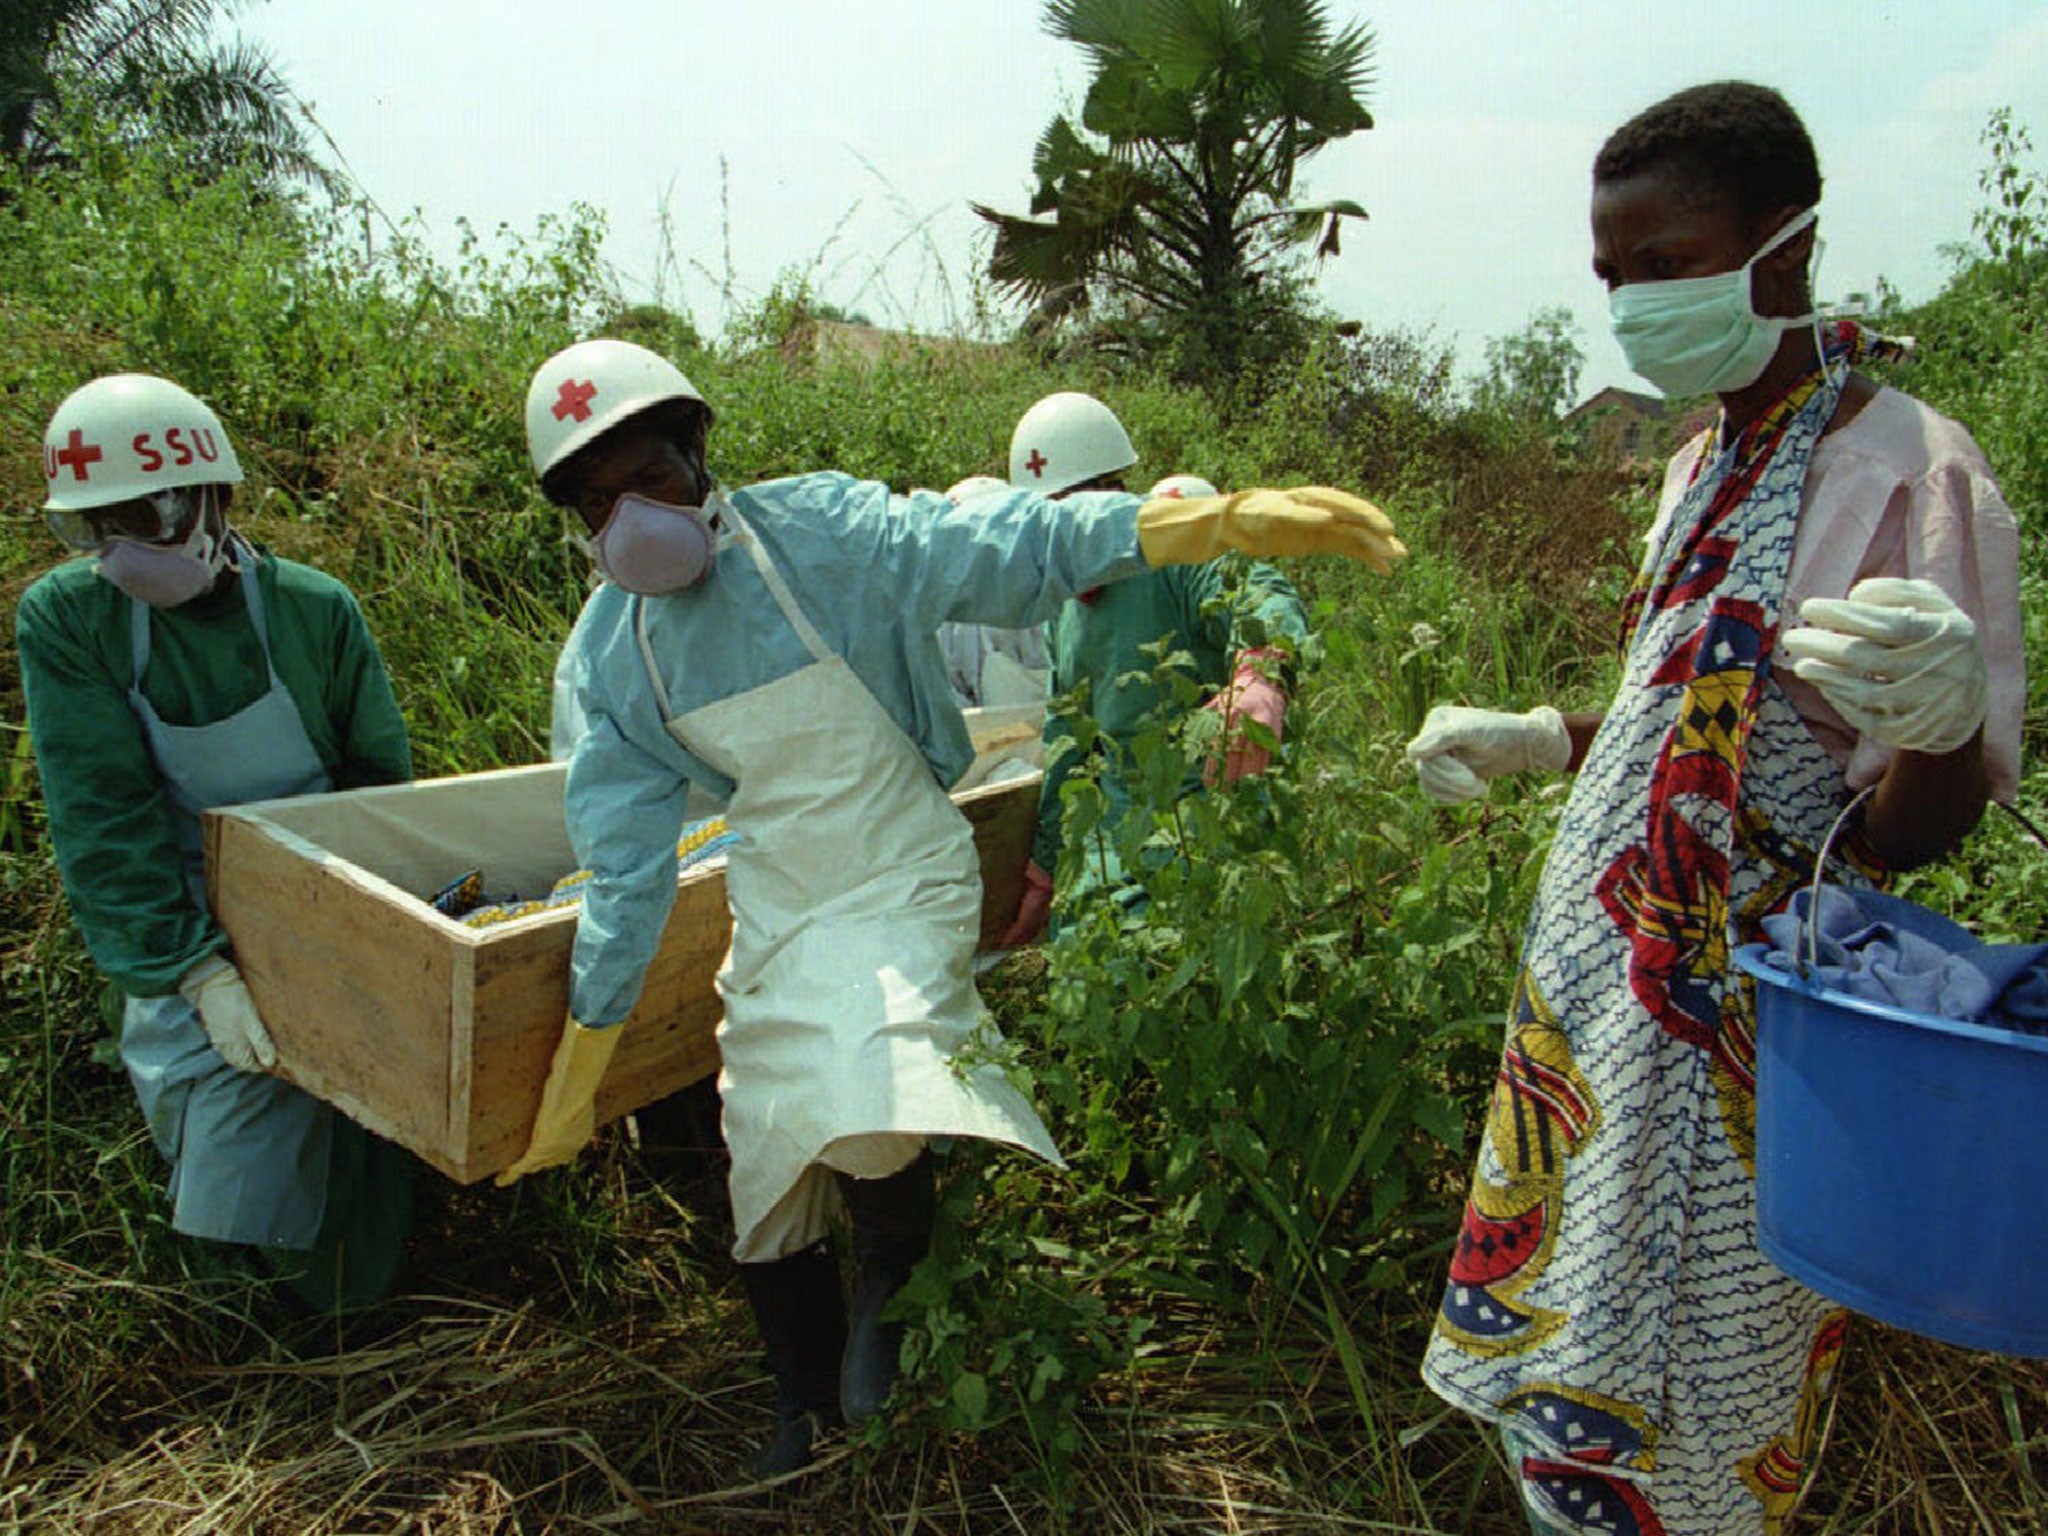 A woman walks beside the body of her mother during the 1995 Kikwit Ebola outbreak in what was then Zaire